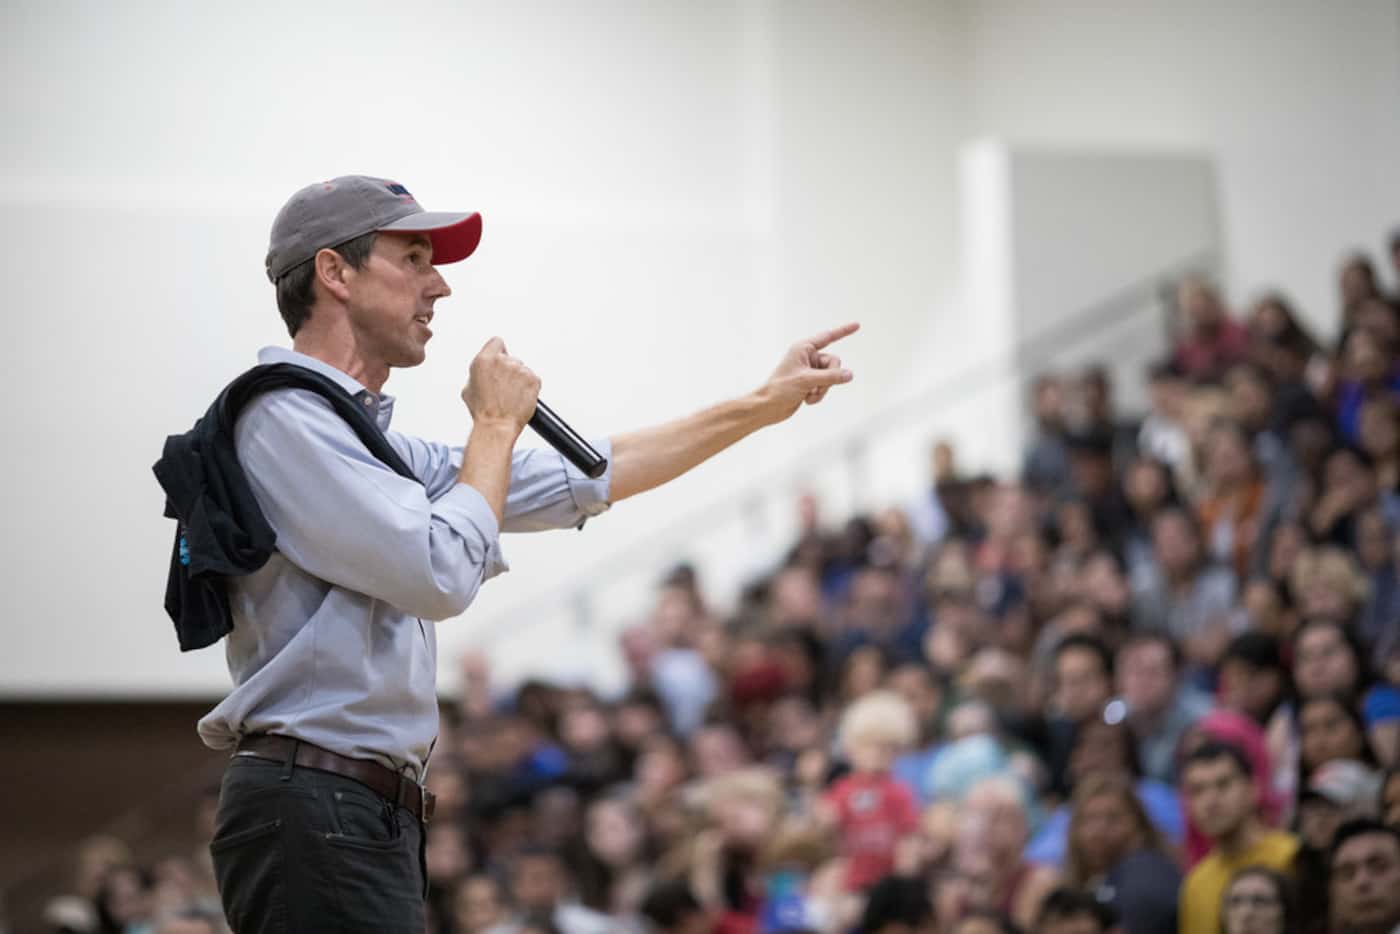 Senate candidate Rep. Beto O'Rourke says his vision for Texas' business community is...